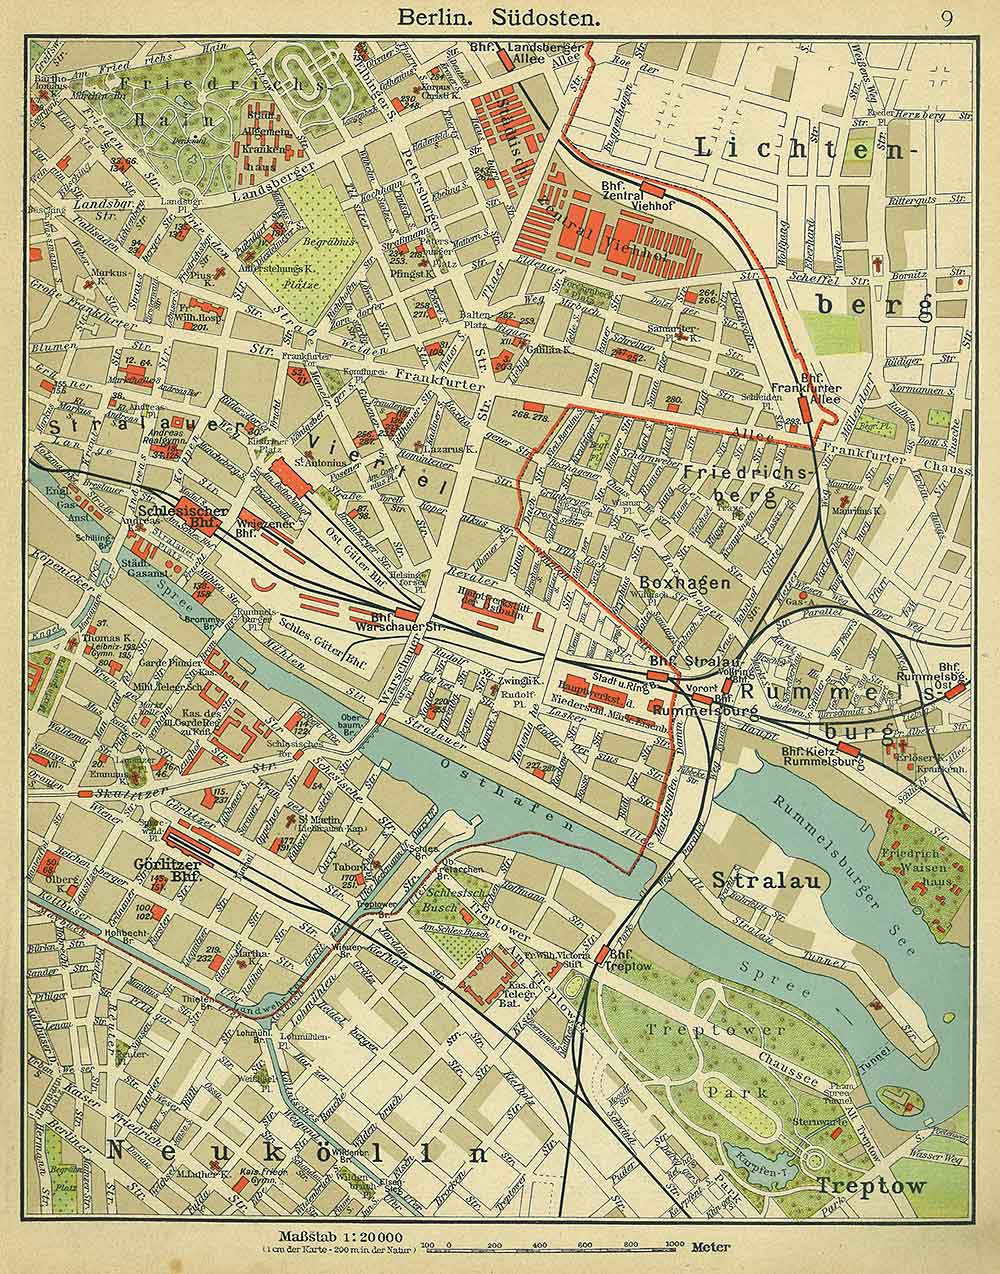 Berlin southeastwards, Andrees 'Berliner Schul-Atlas', 1916, page 9, published size to print borders 21.28 cm wide by 27.57 cm high.